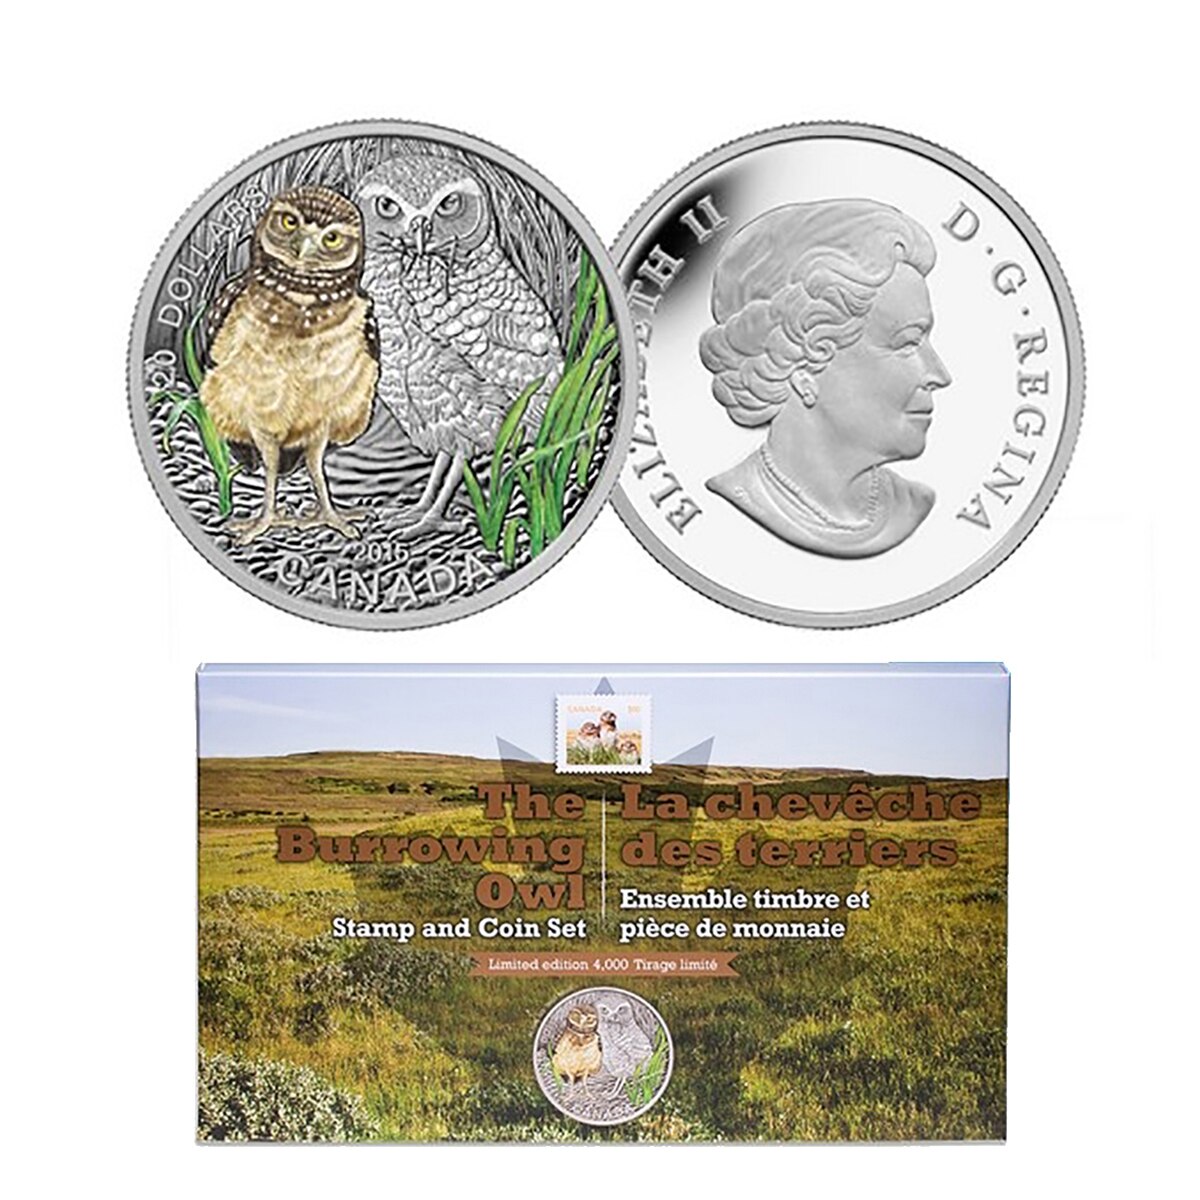 Details about   2011 Canada $5 .925 Silver with Niobium Coloured Coin Full Buck Moon RCM Coin 